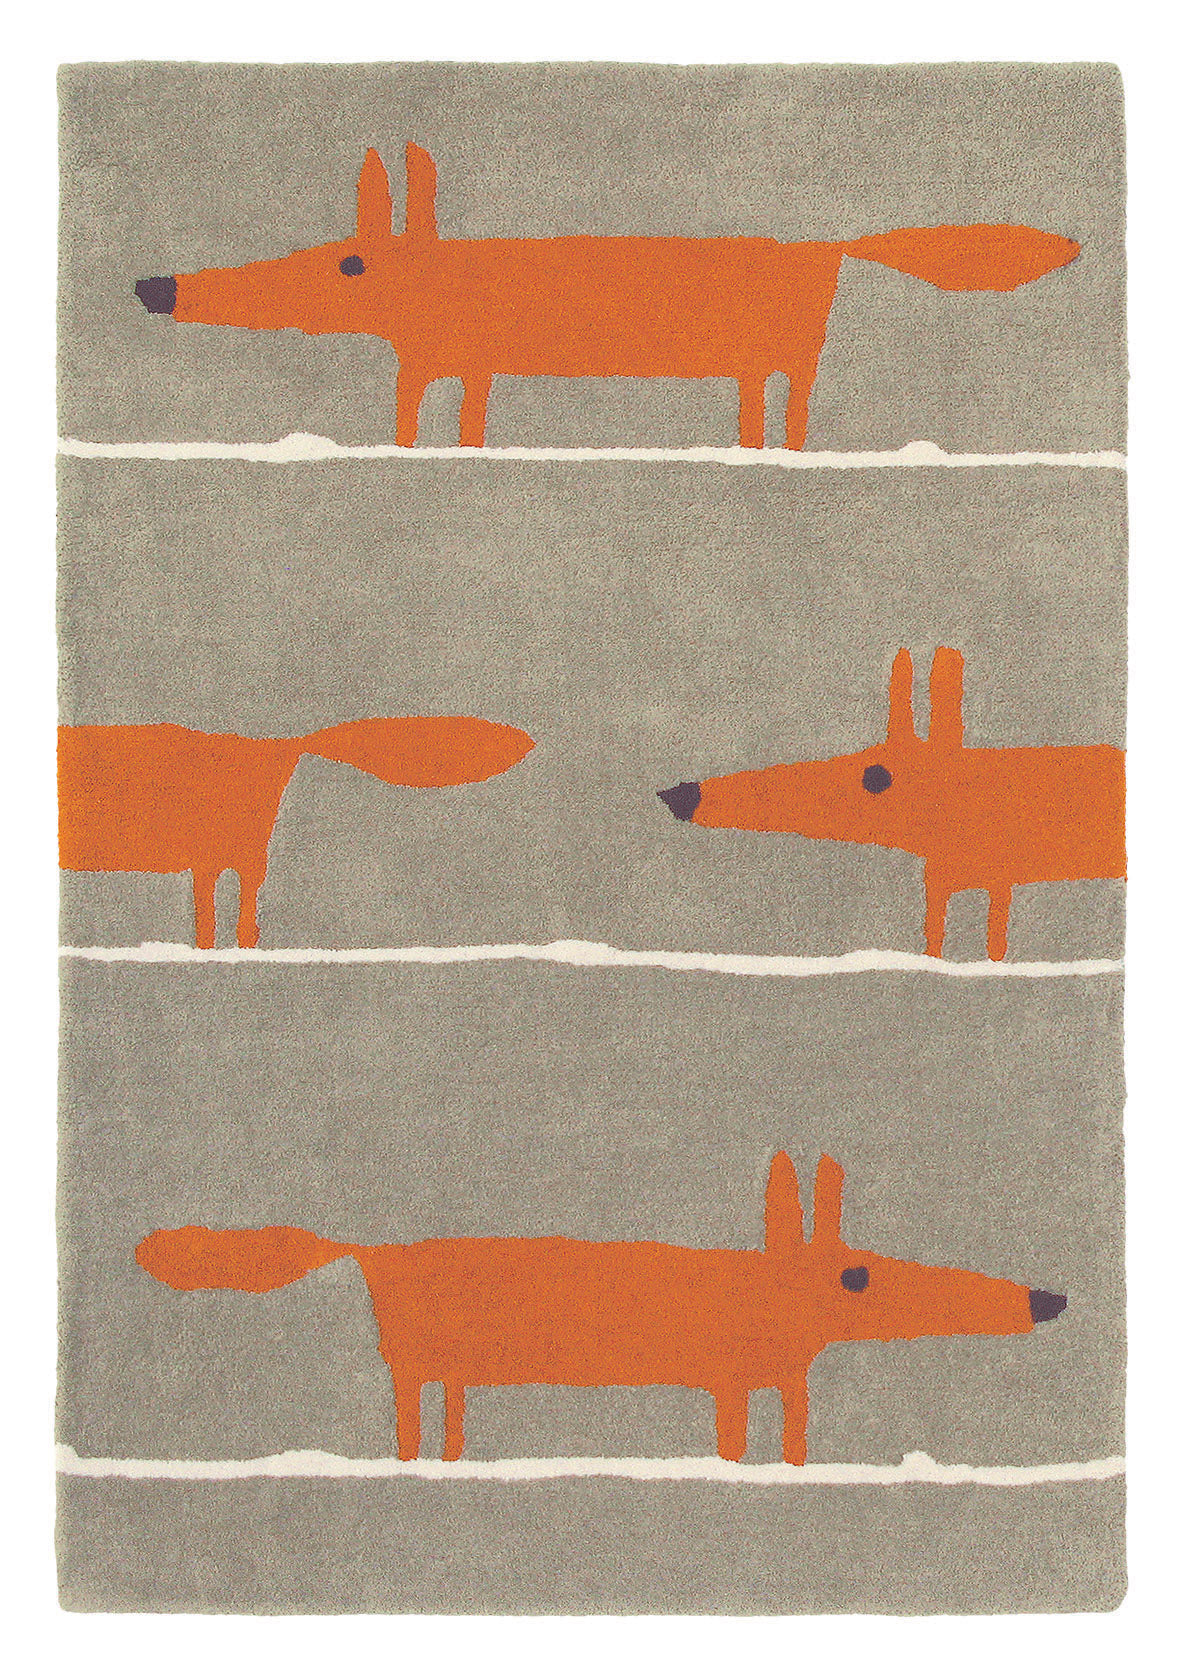 Pink rectangular rug decorated with white lines and a repeating grey fox pattern